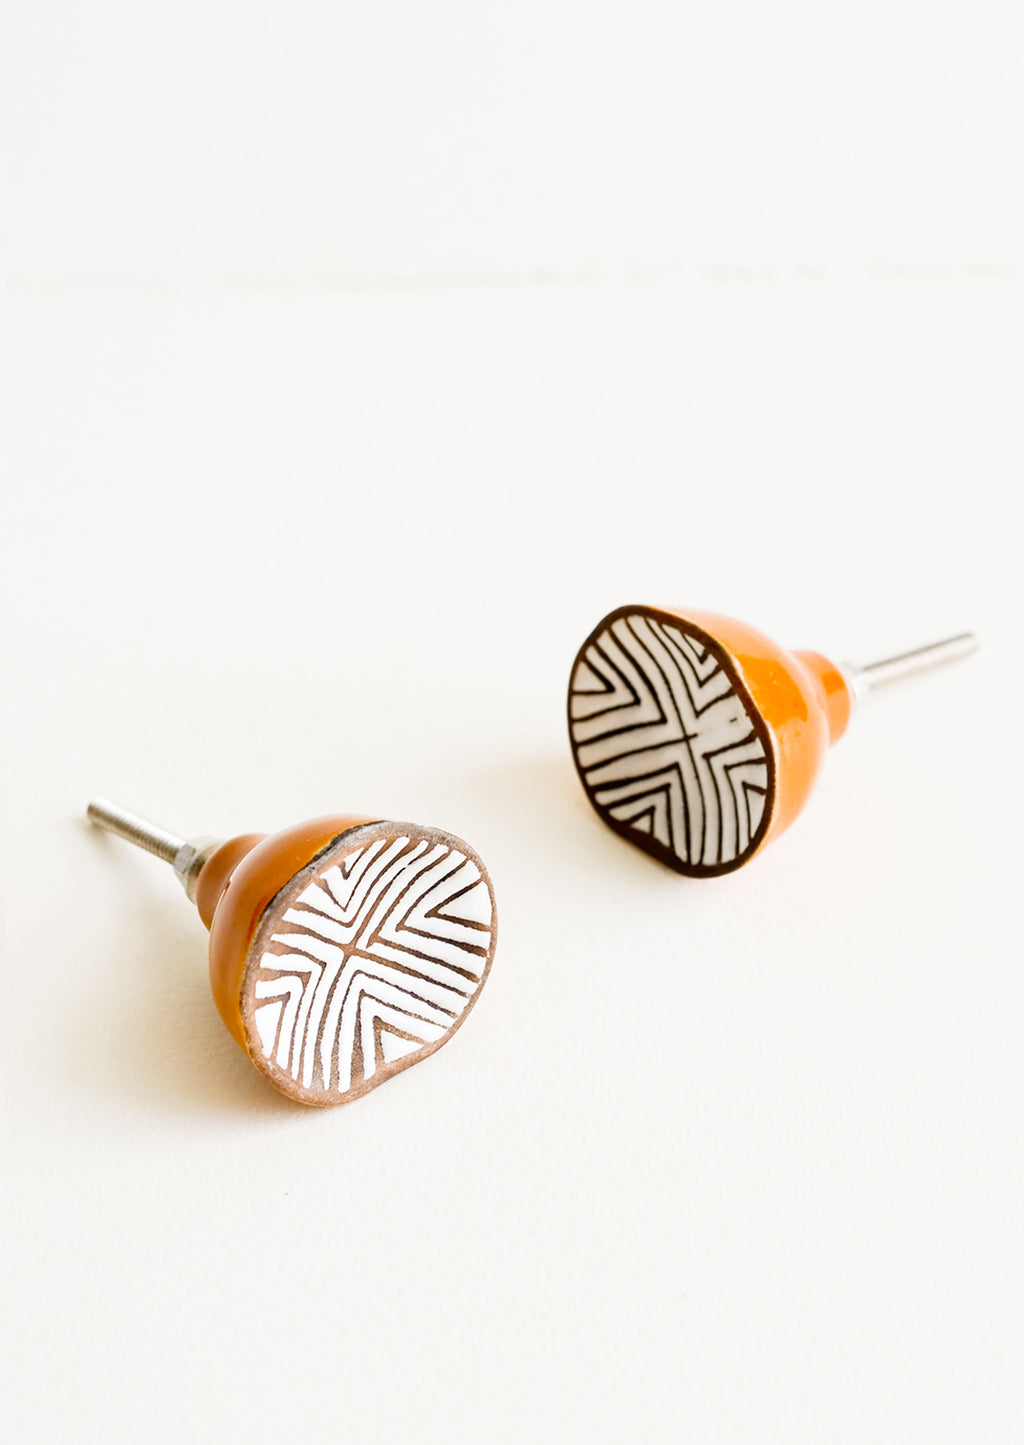 1: Round ceramic cabinet knobs with brown base and white chevron patterned front.